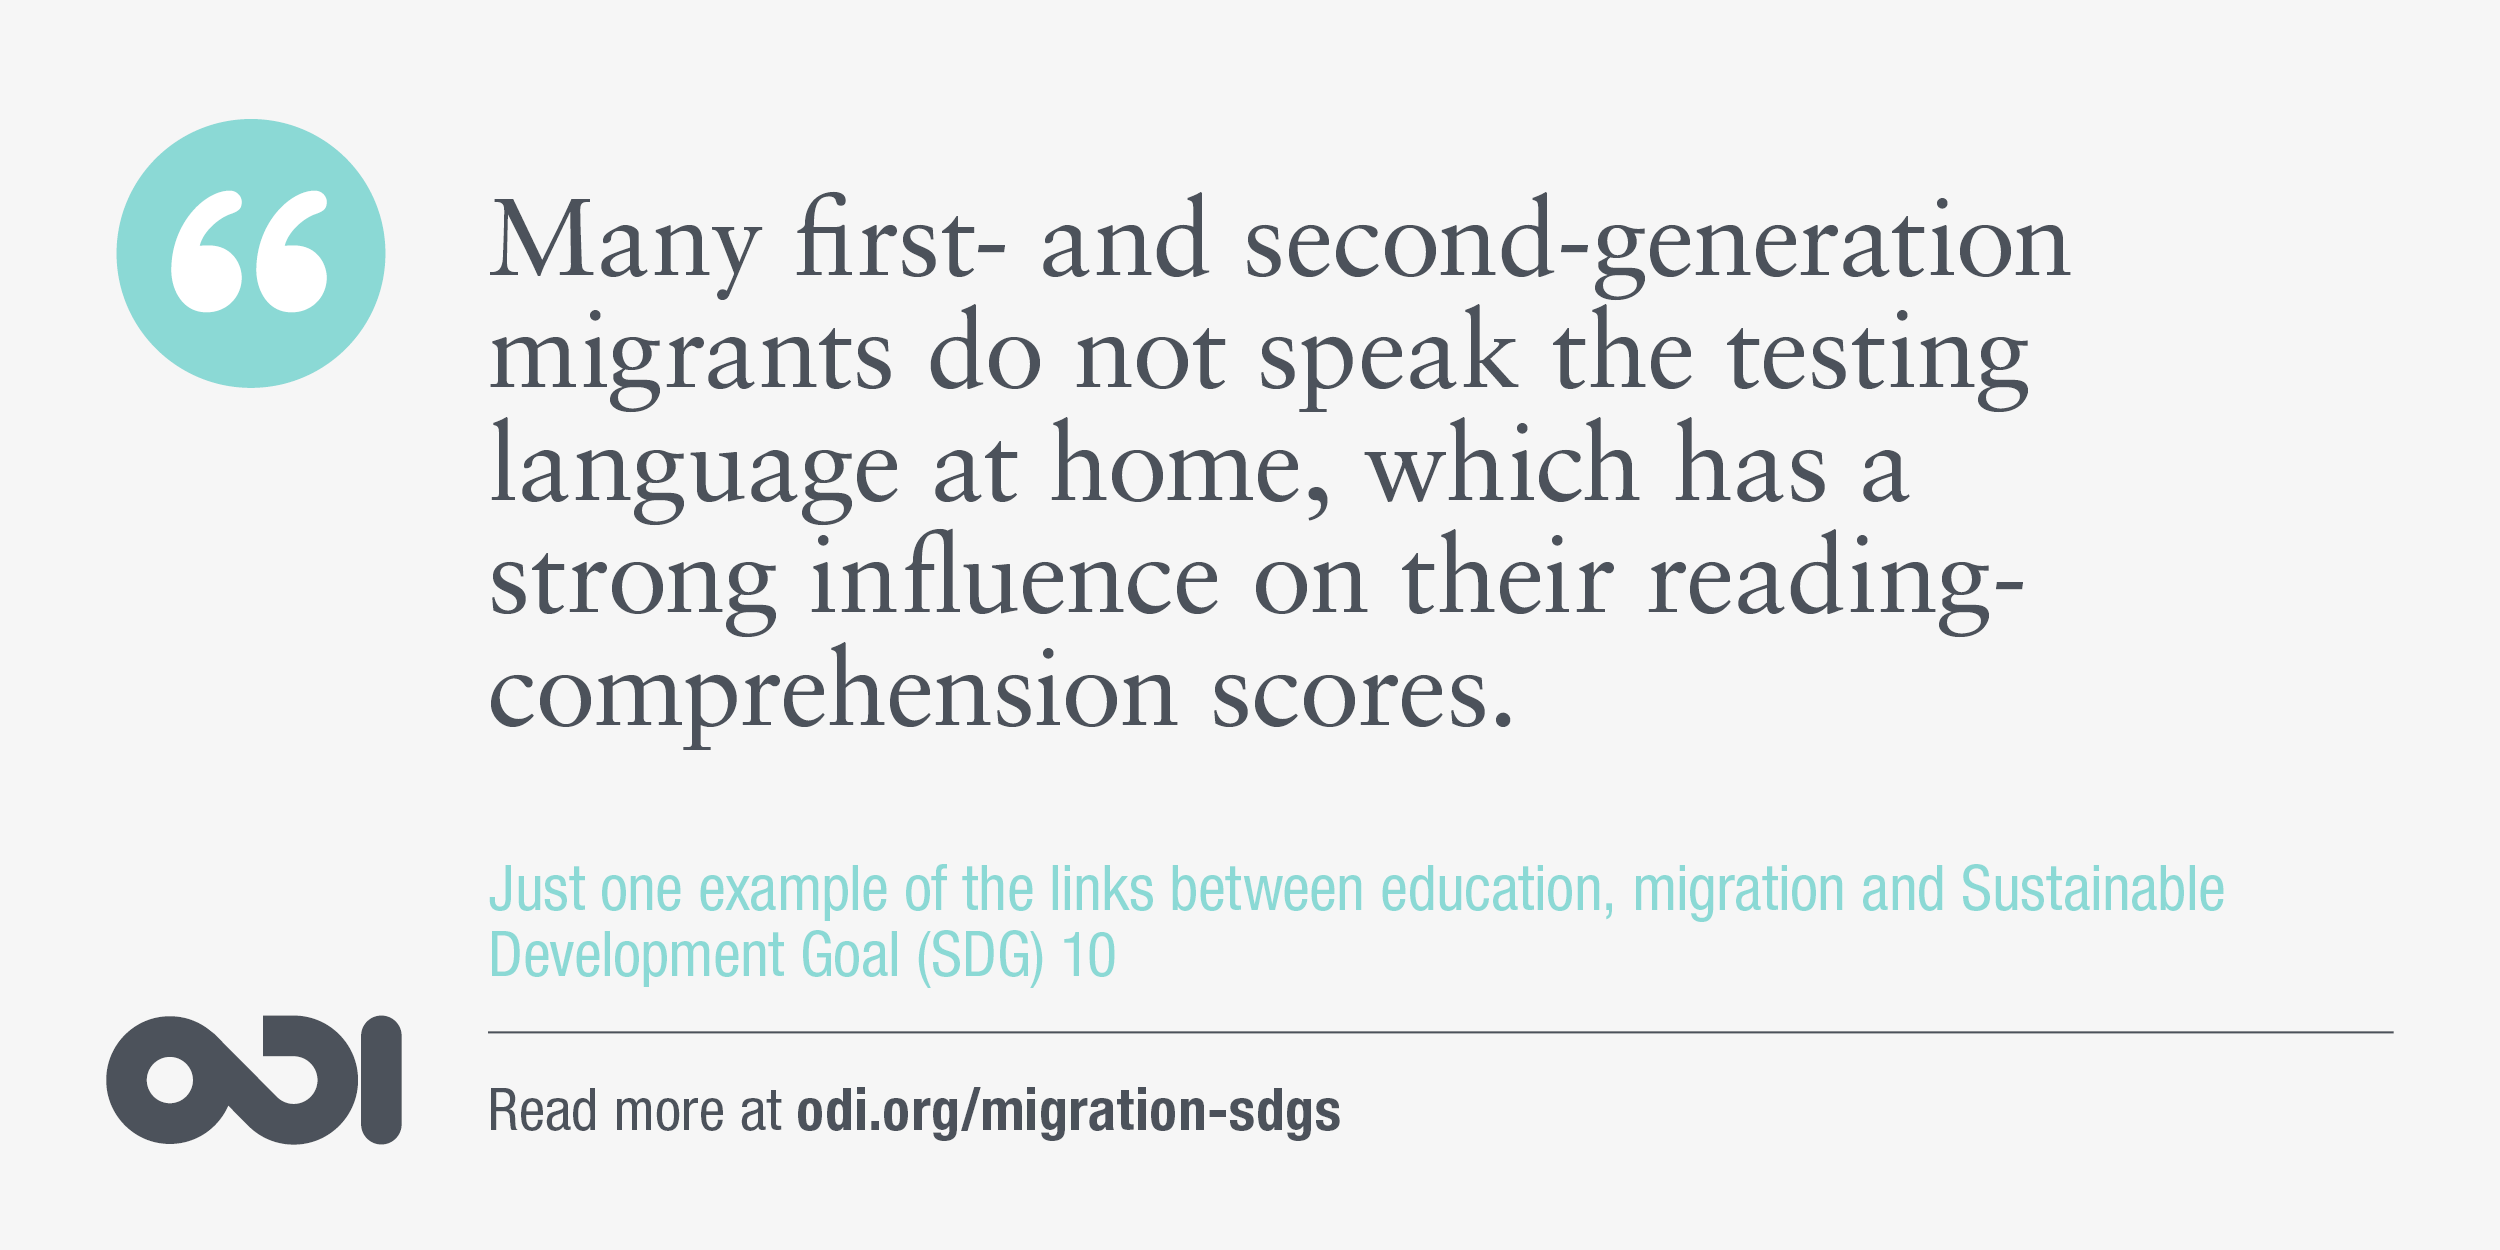 The links between education, migration and SDG 10.